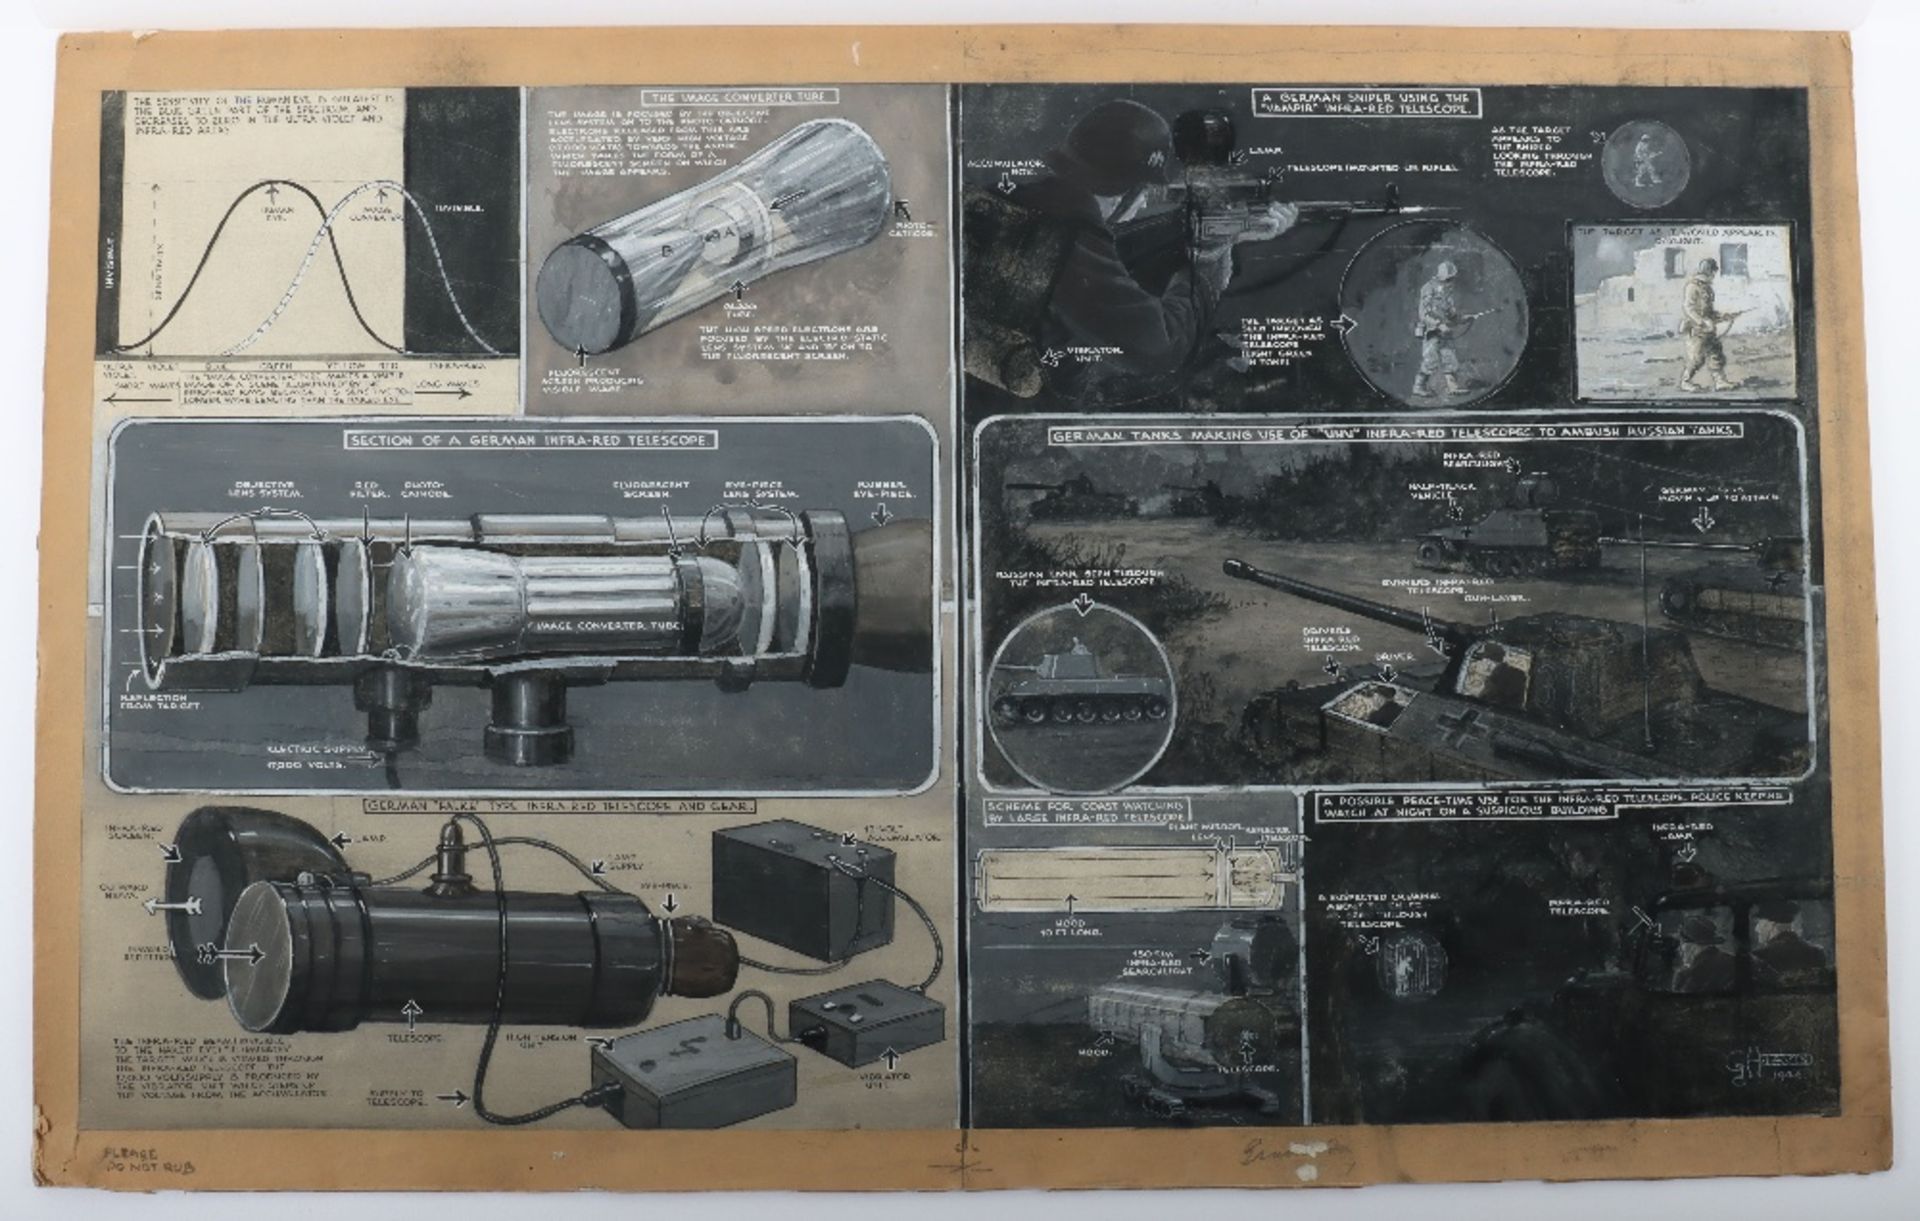 Original Artwork by G.H.Davis Illustrating the Infra-Red Technology used by the Germans at the end o